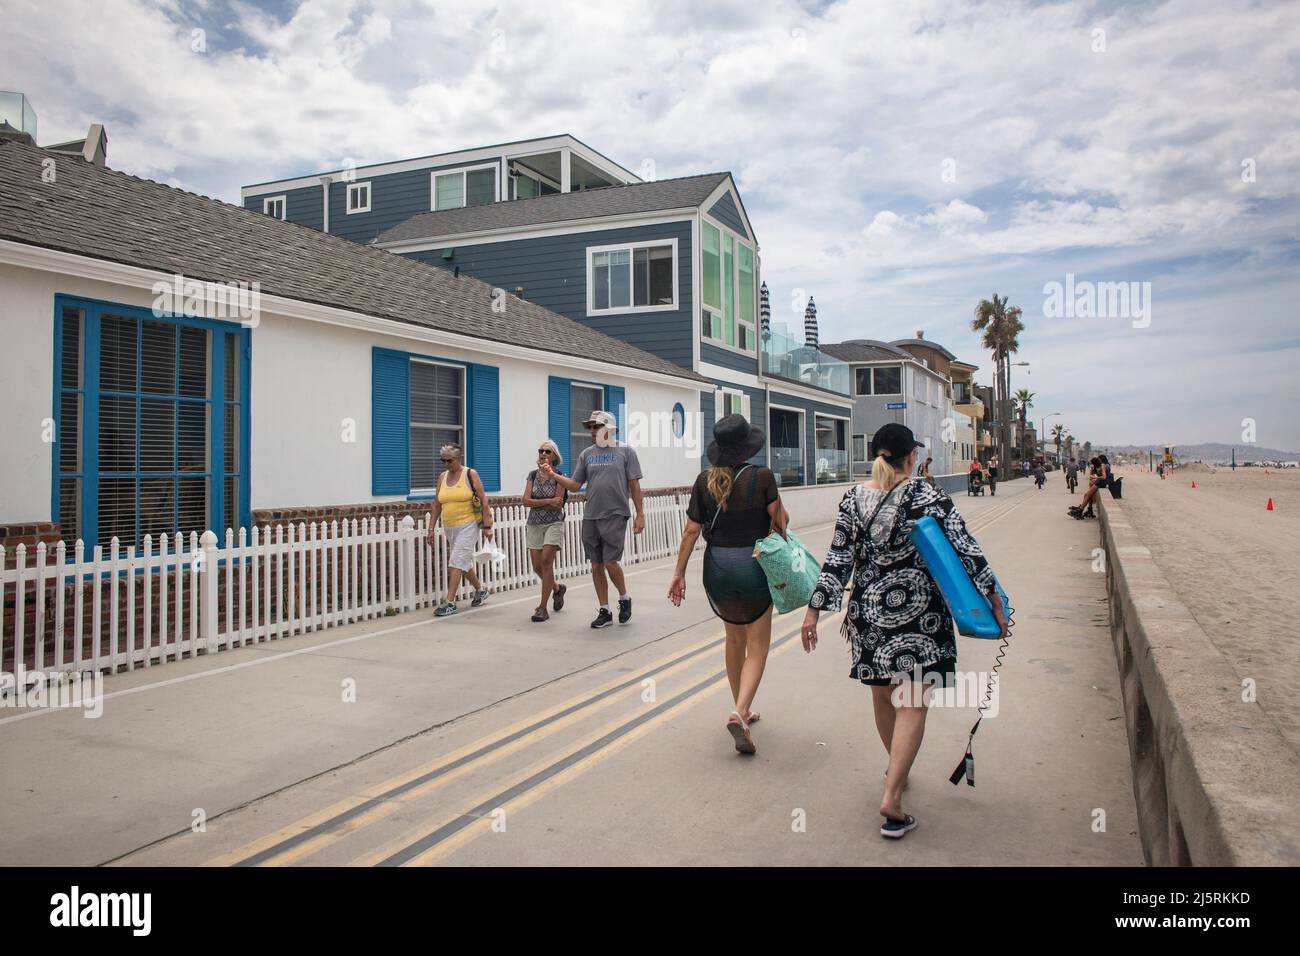 Some tourists strolling on Ocean front Walk in front of some summer holiday houses, Mission Bay, San Diego Stock Photo